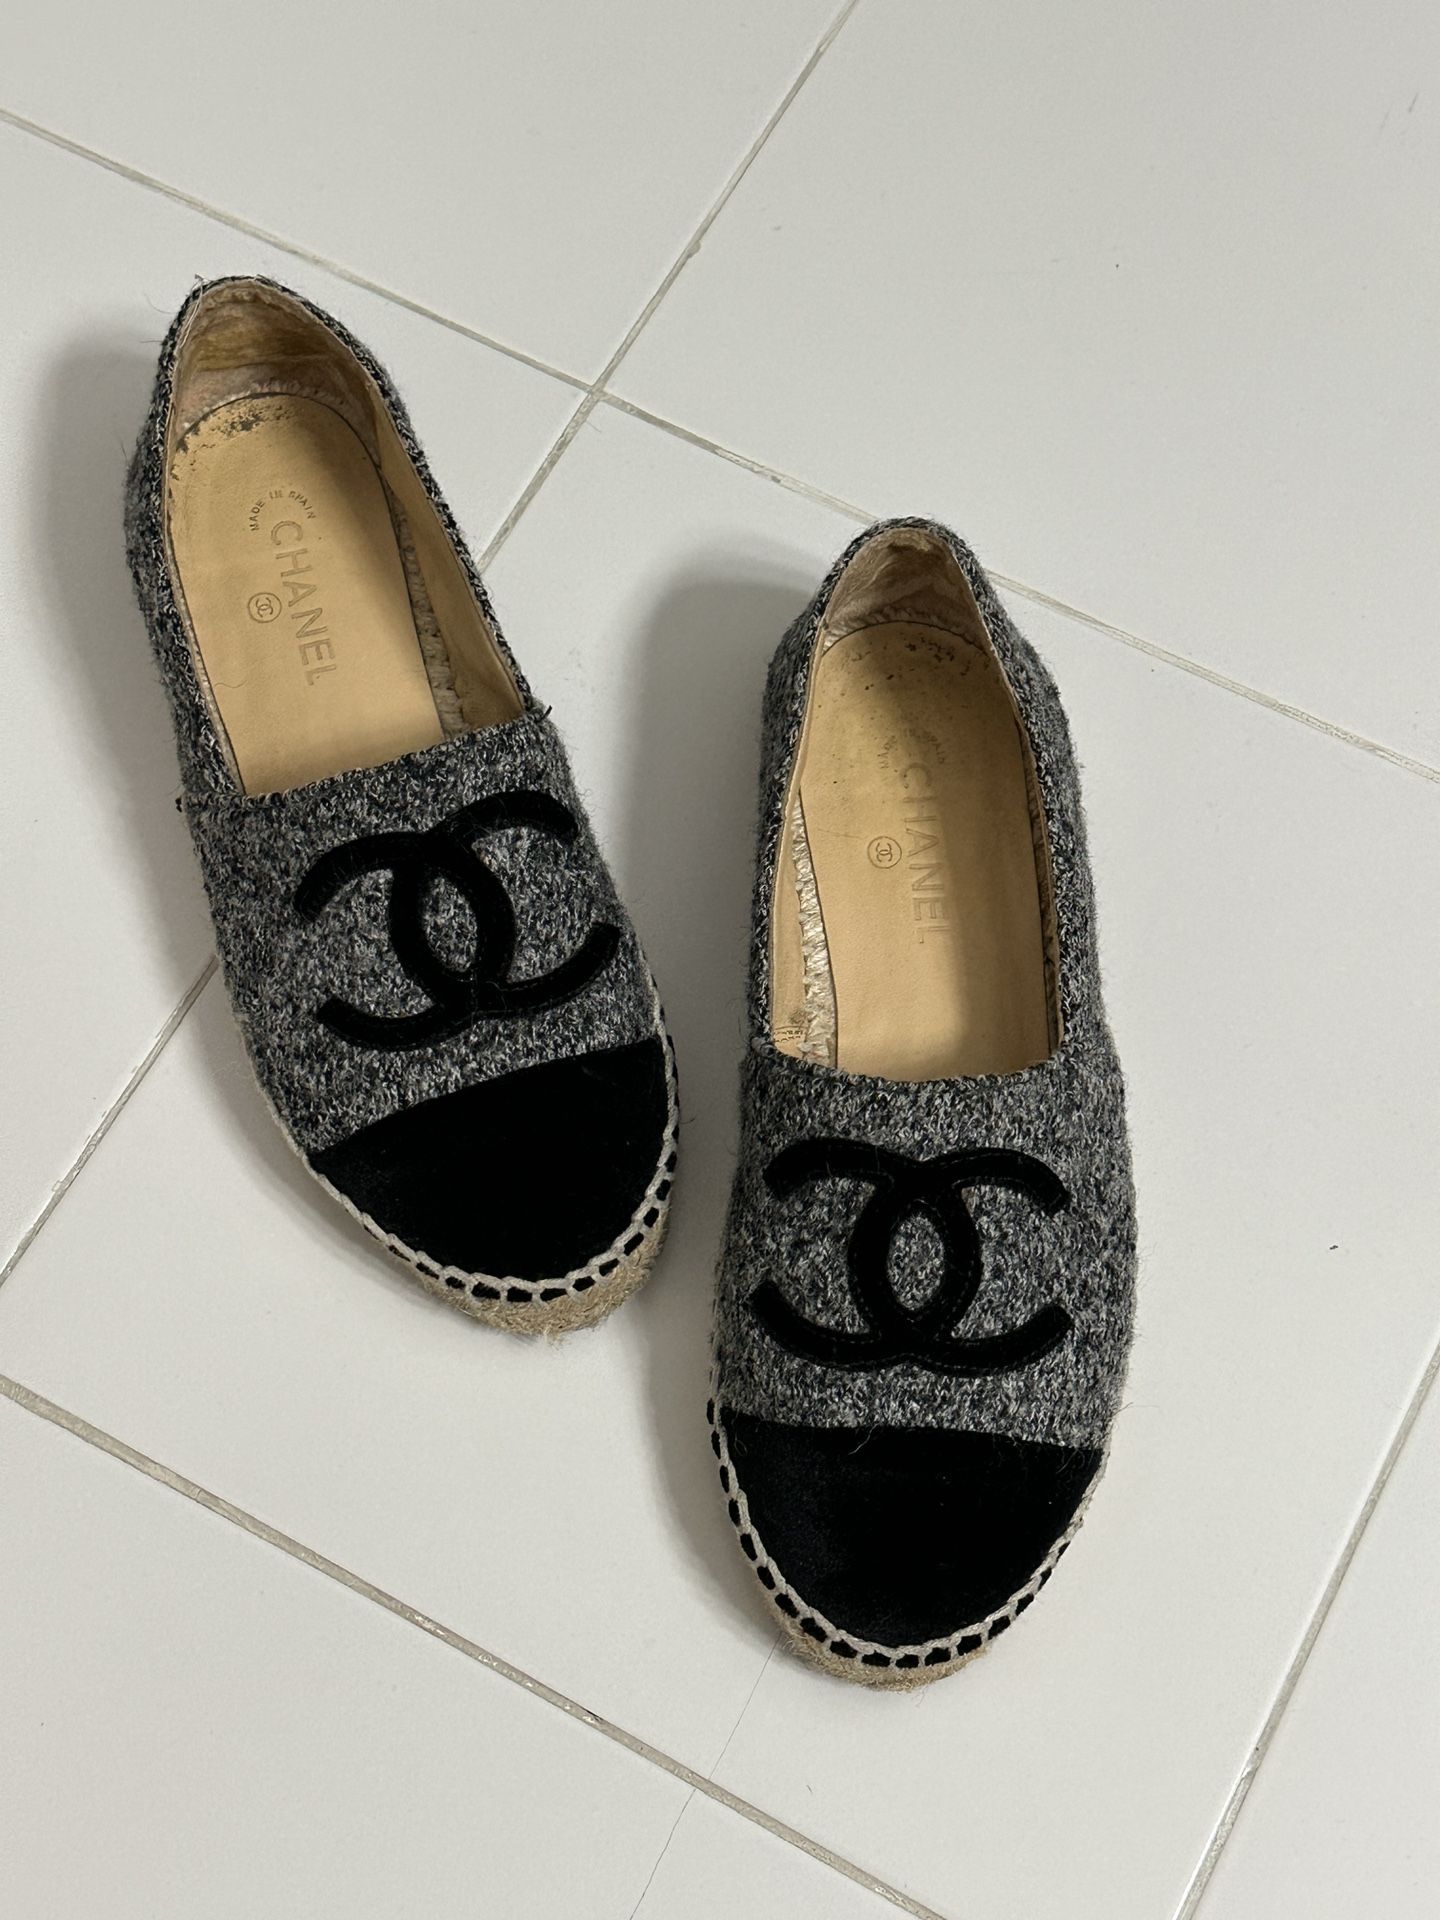 Preowned Chanel Wool & velvet Size 38 Espadrilles Shoes for Sale in Newport  Beach, CA - OfferUp